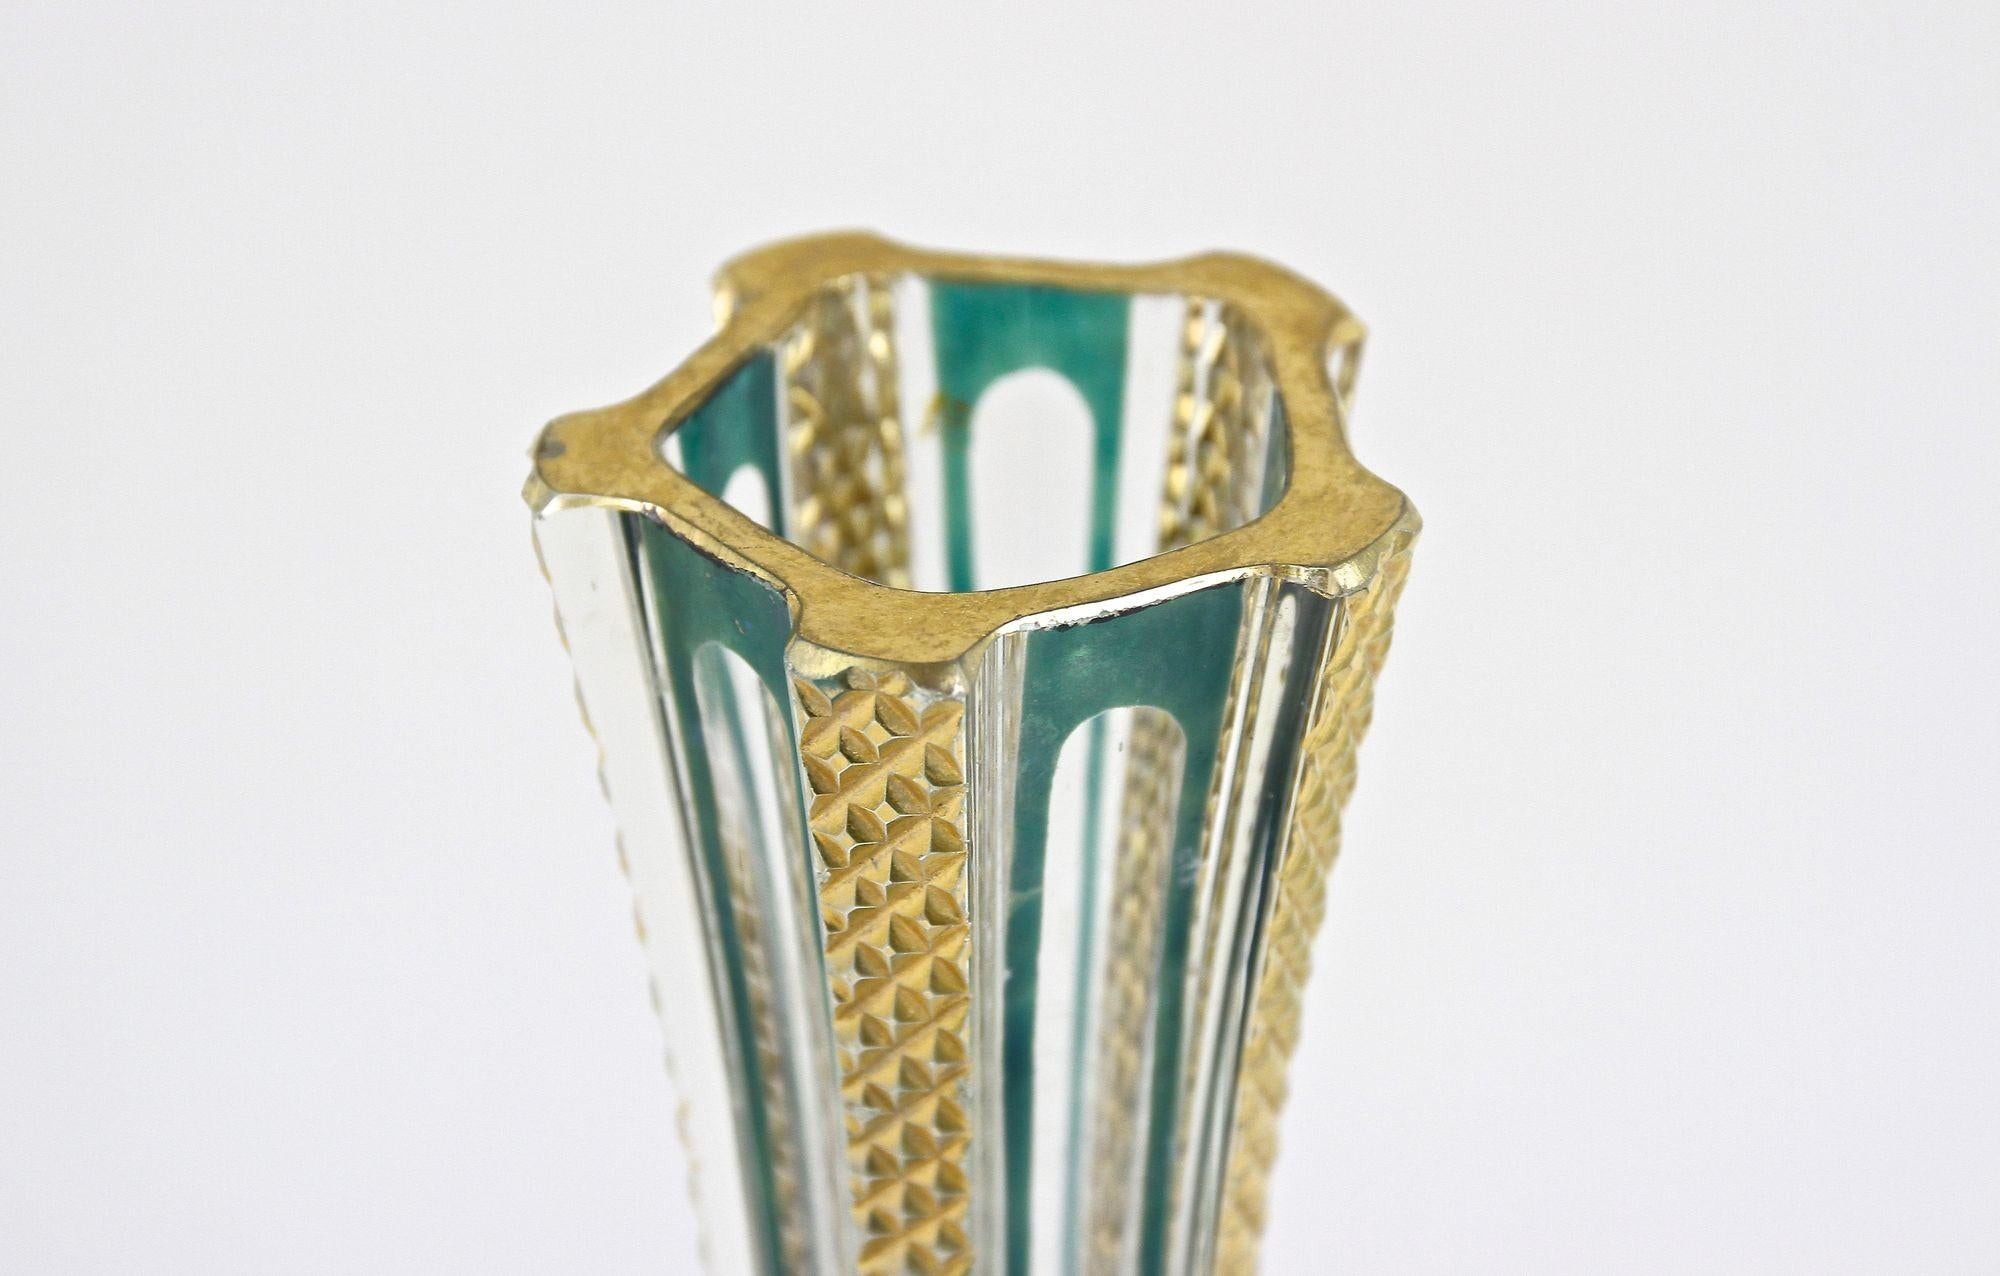 Italian Murano Glass Vase With Gold Accents, Early 20th Century - Italy ca. 1930 For Sale